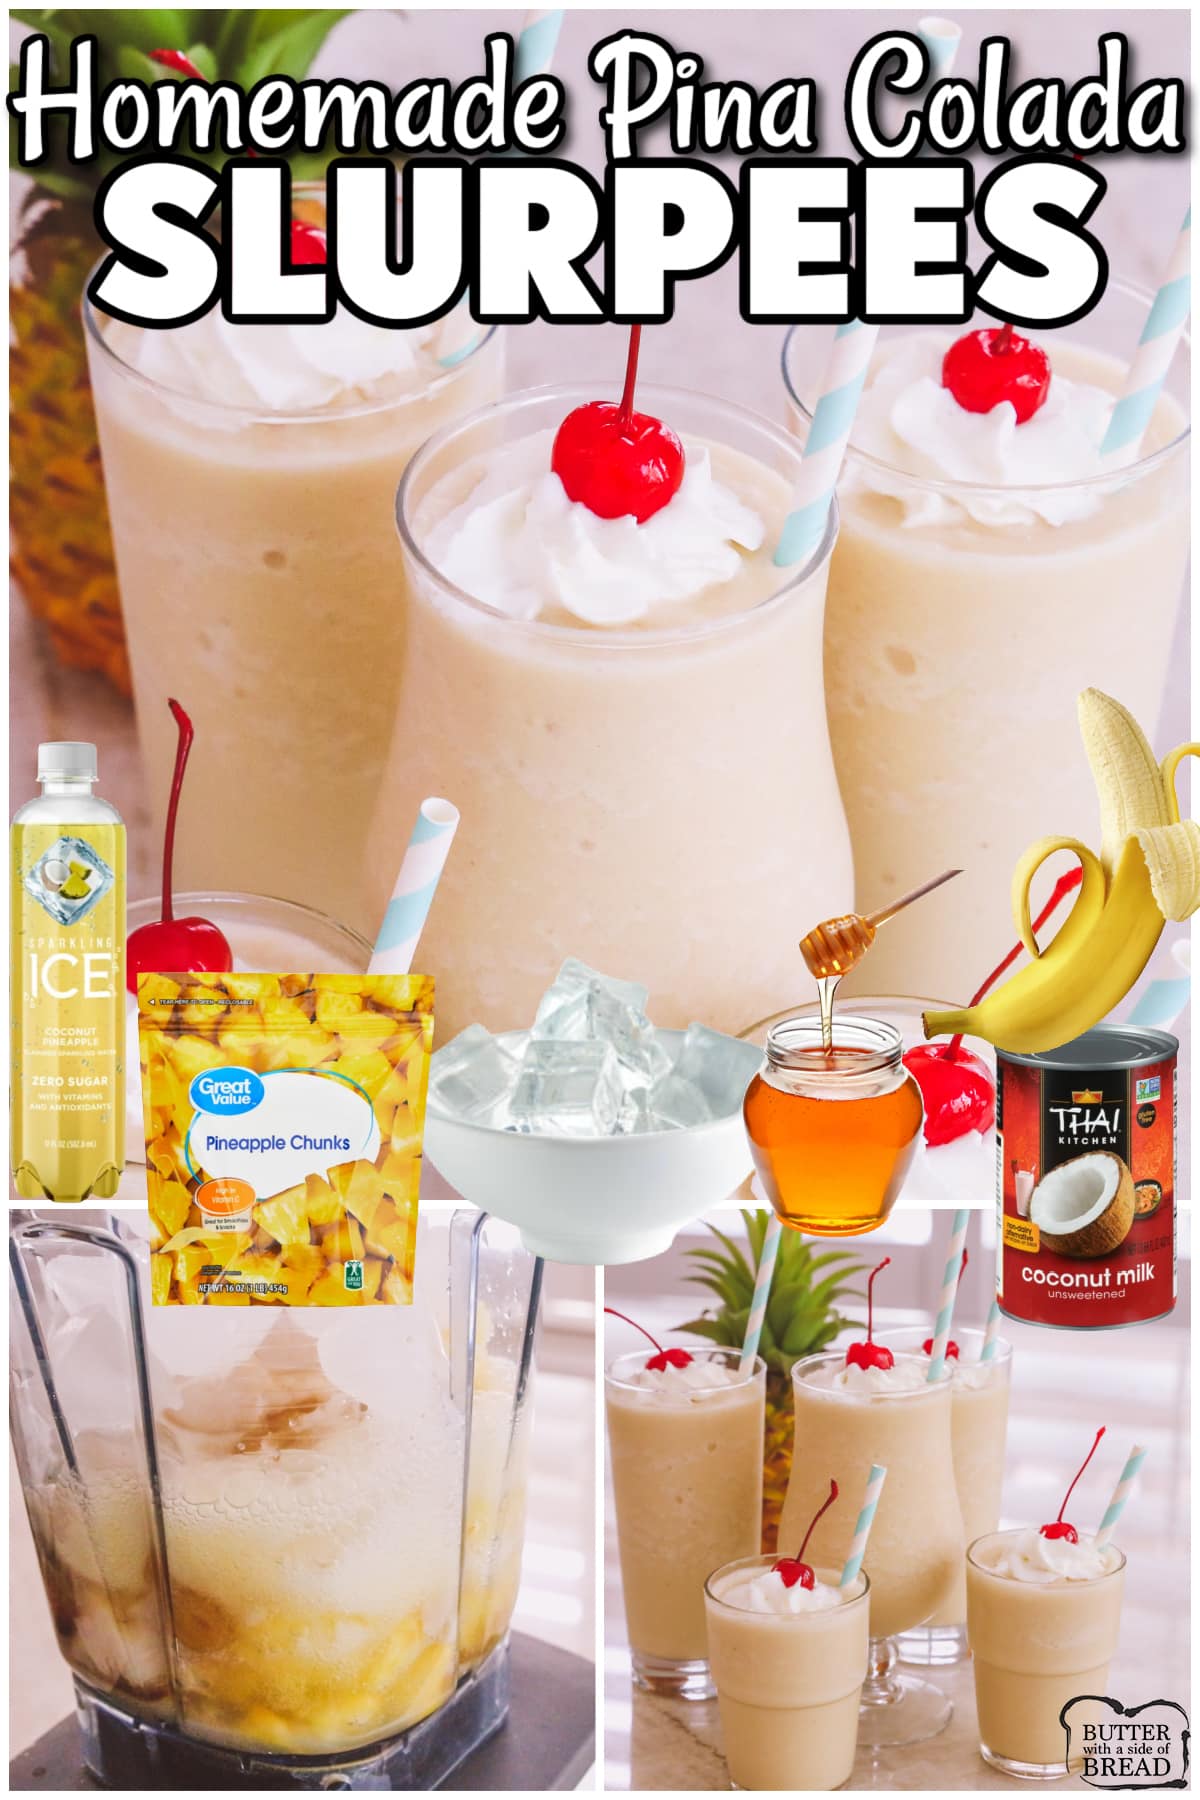 Homemade Pina Colada Slurpees made easy with real ingredients! So much better than anything store-bought, these pina colada slurpees have amazing flavor and that classic fizz everyone loves! 